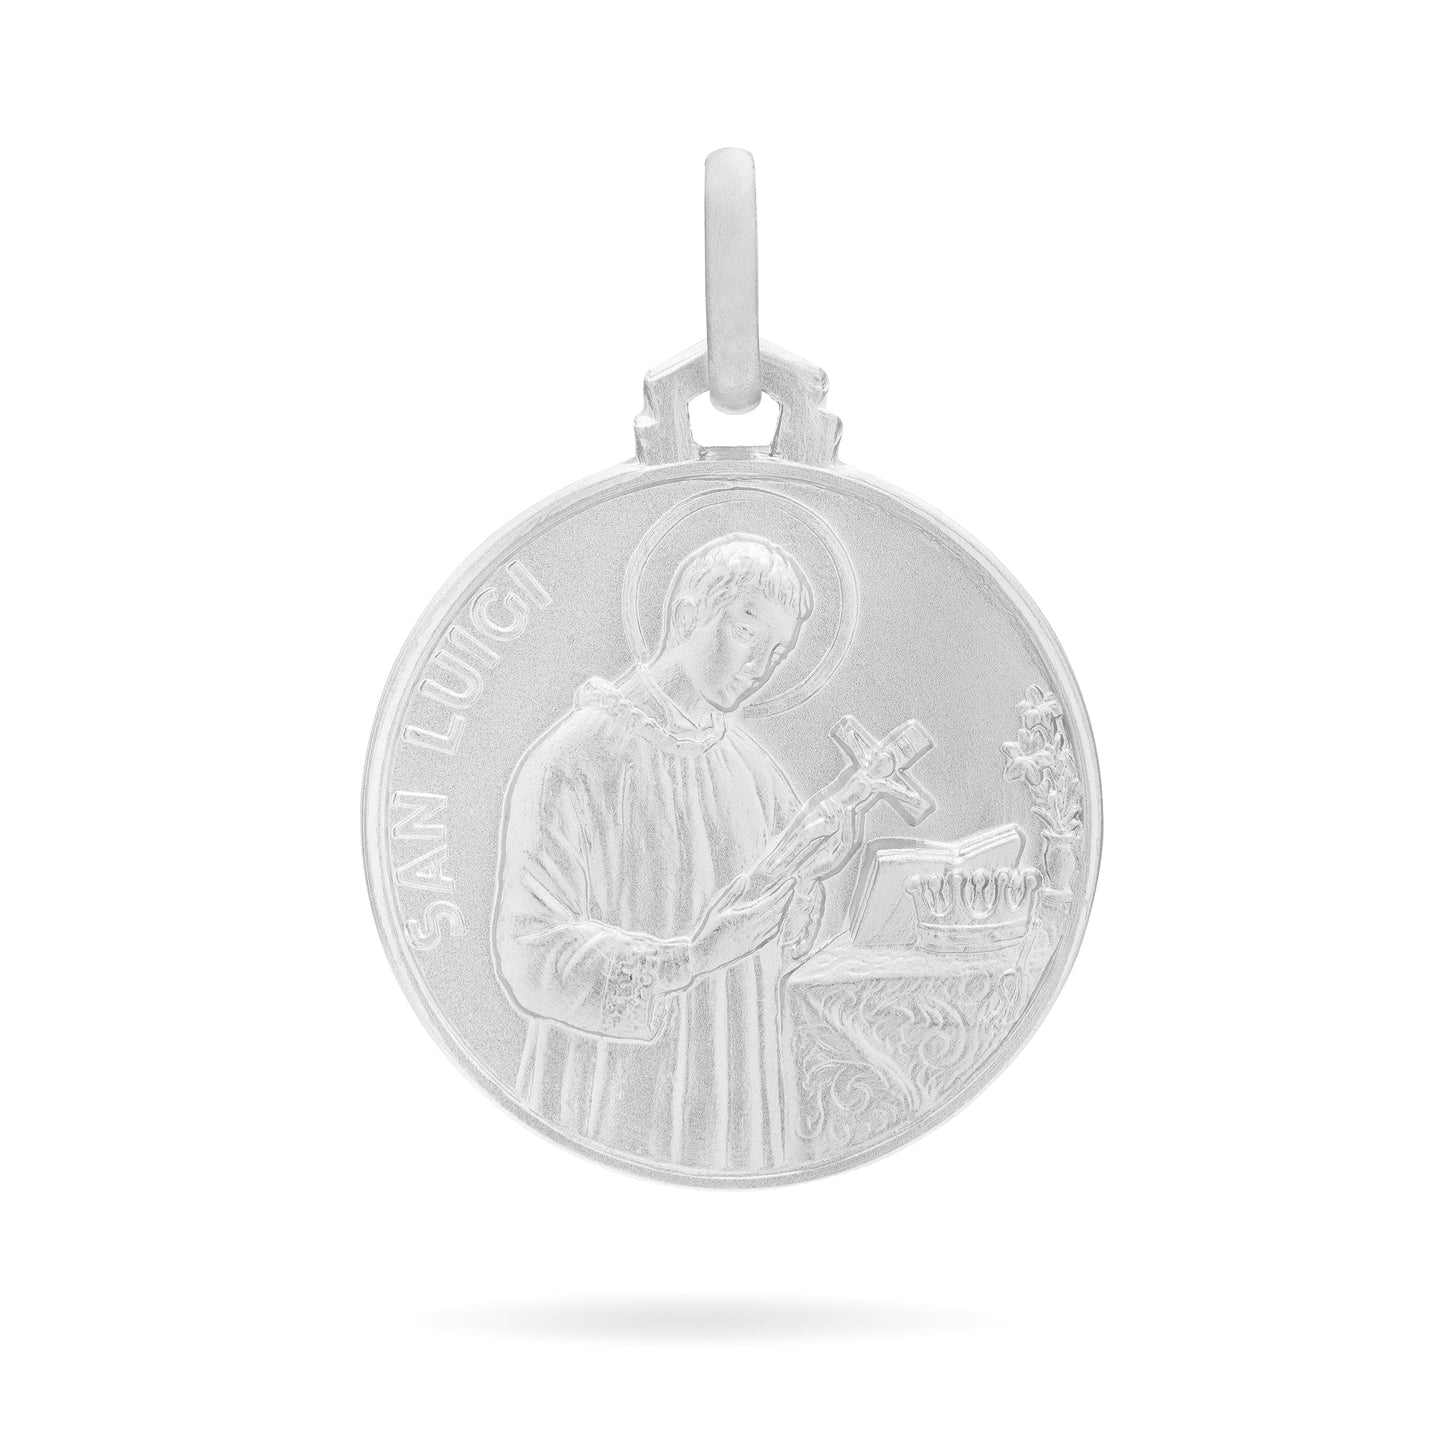 MONDO CATTOLICO Medal 18 mm (0.70 in) Saint Aloysius Sterling Silver Medal